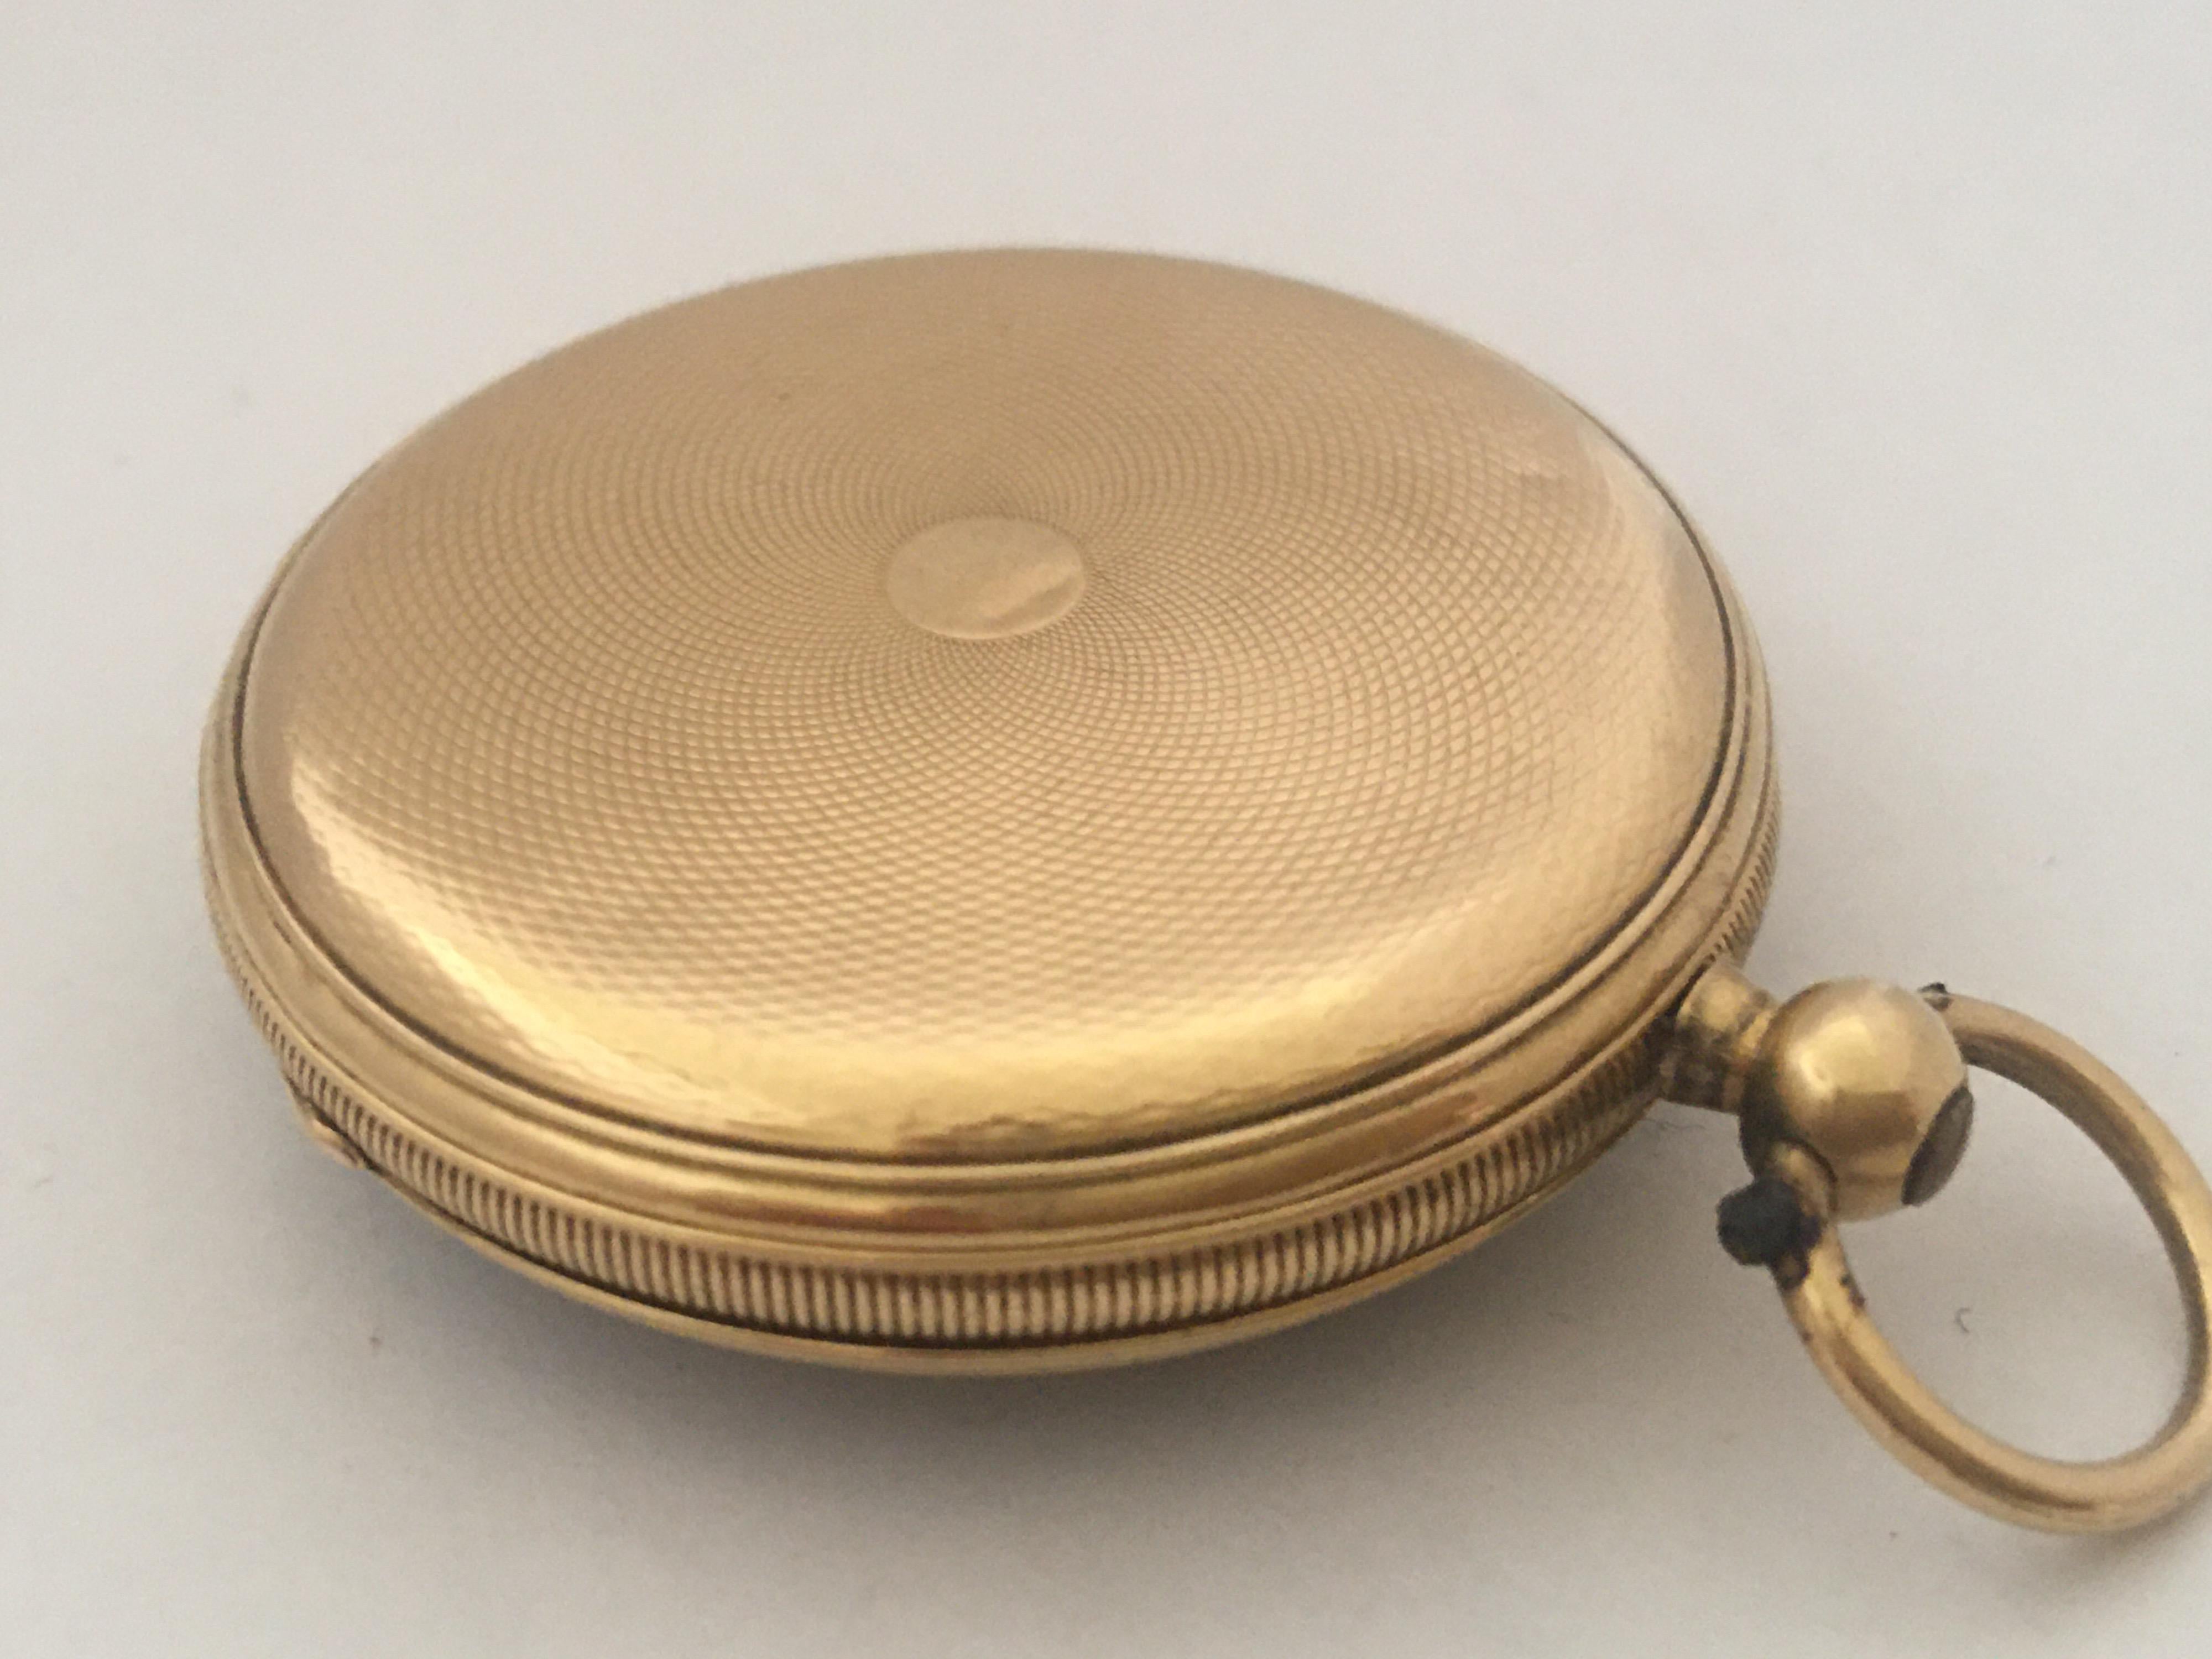 Antique 18 Karat Gold Engine Turned Case Stauffer Chaux-de-Fonds Pocket Watch In Good Condition For Sale In Carlisle, GB